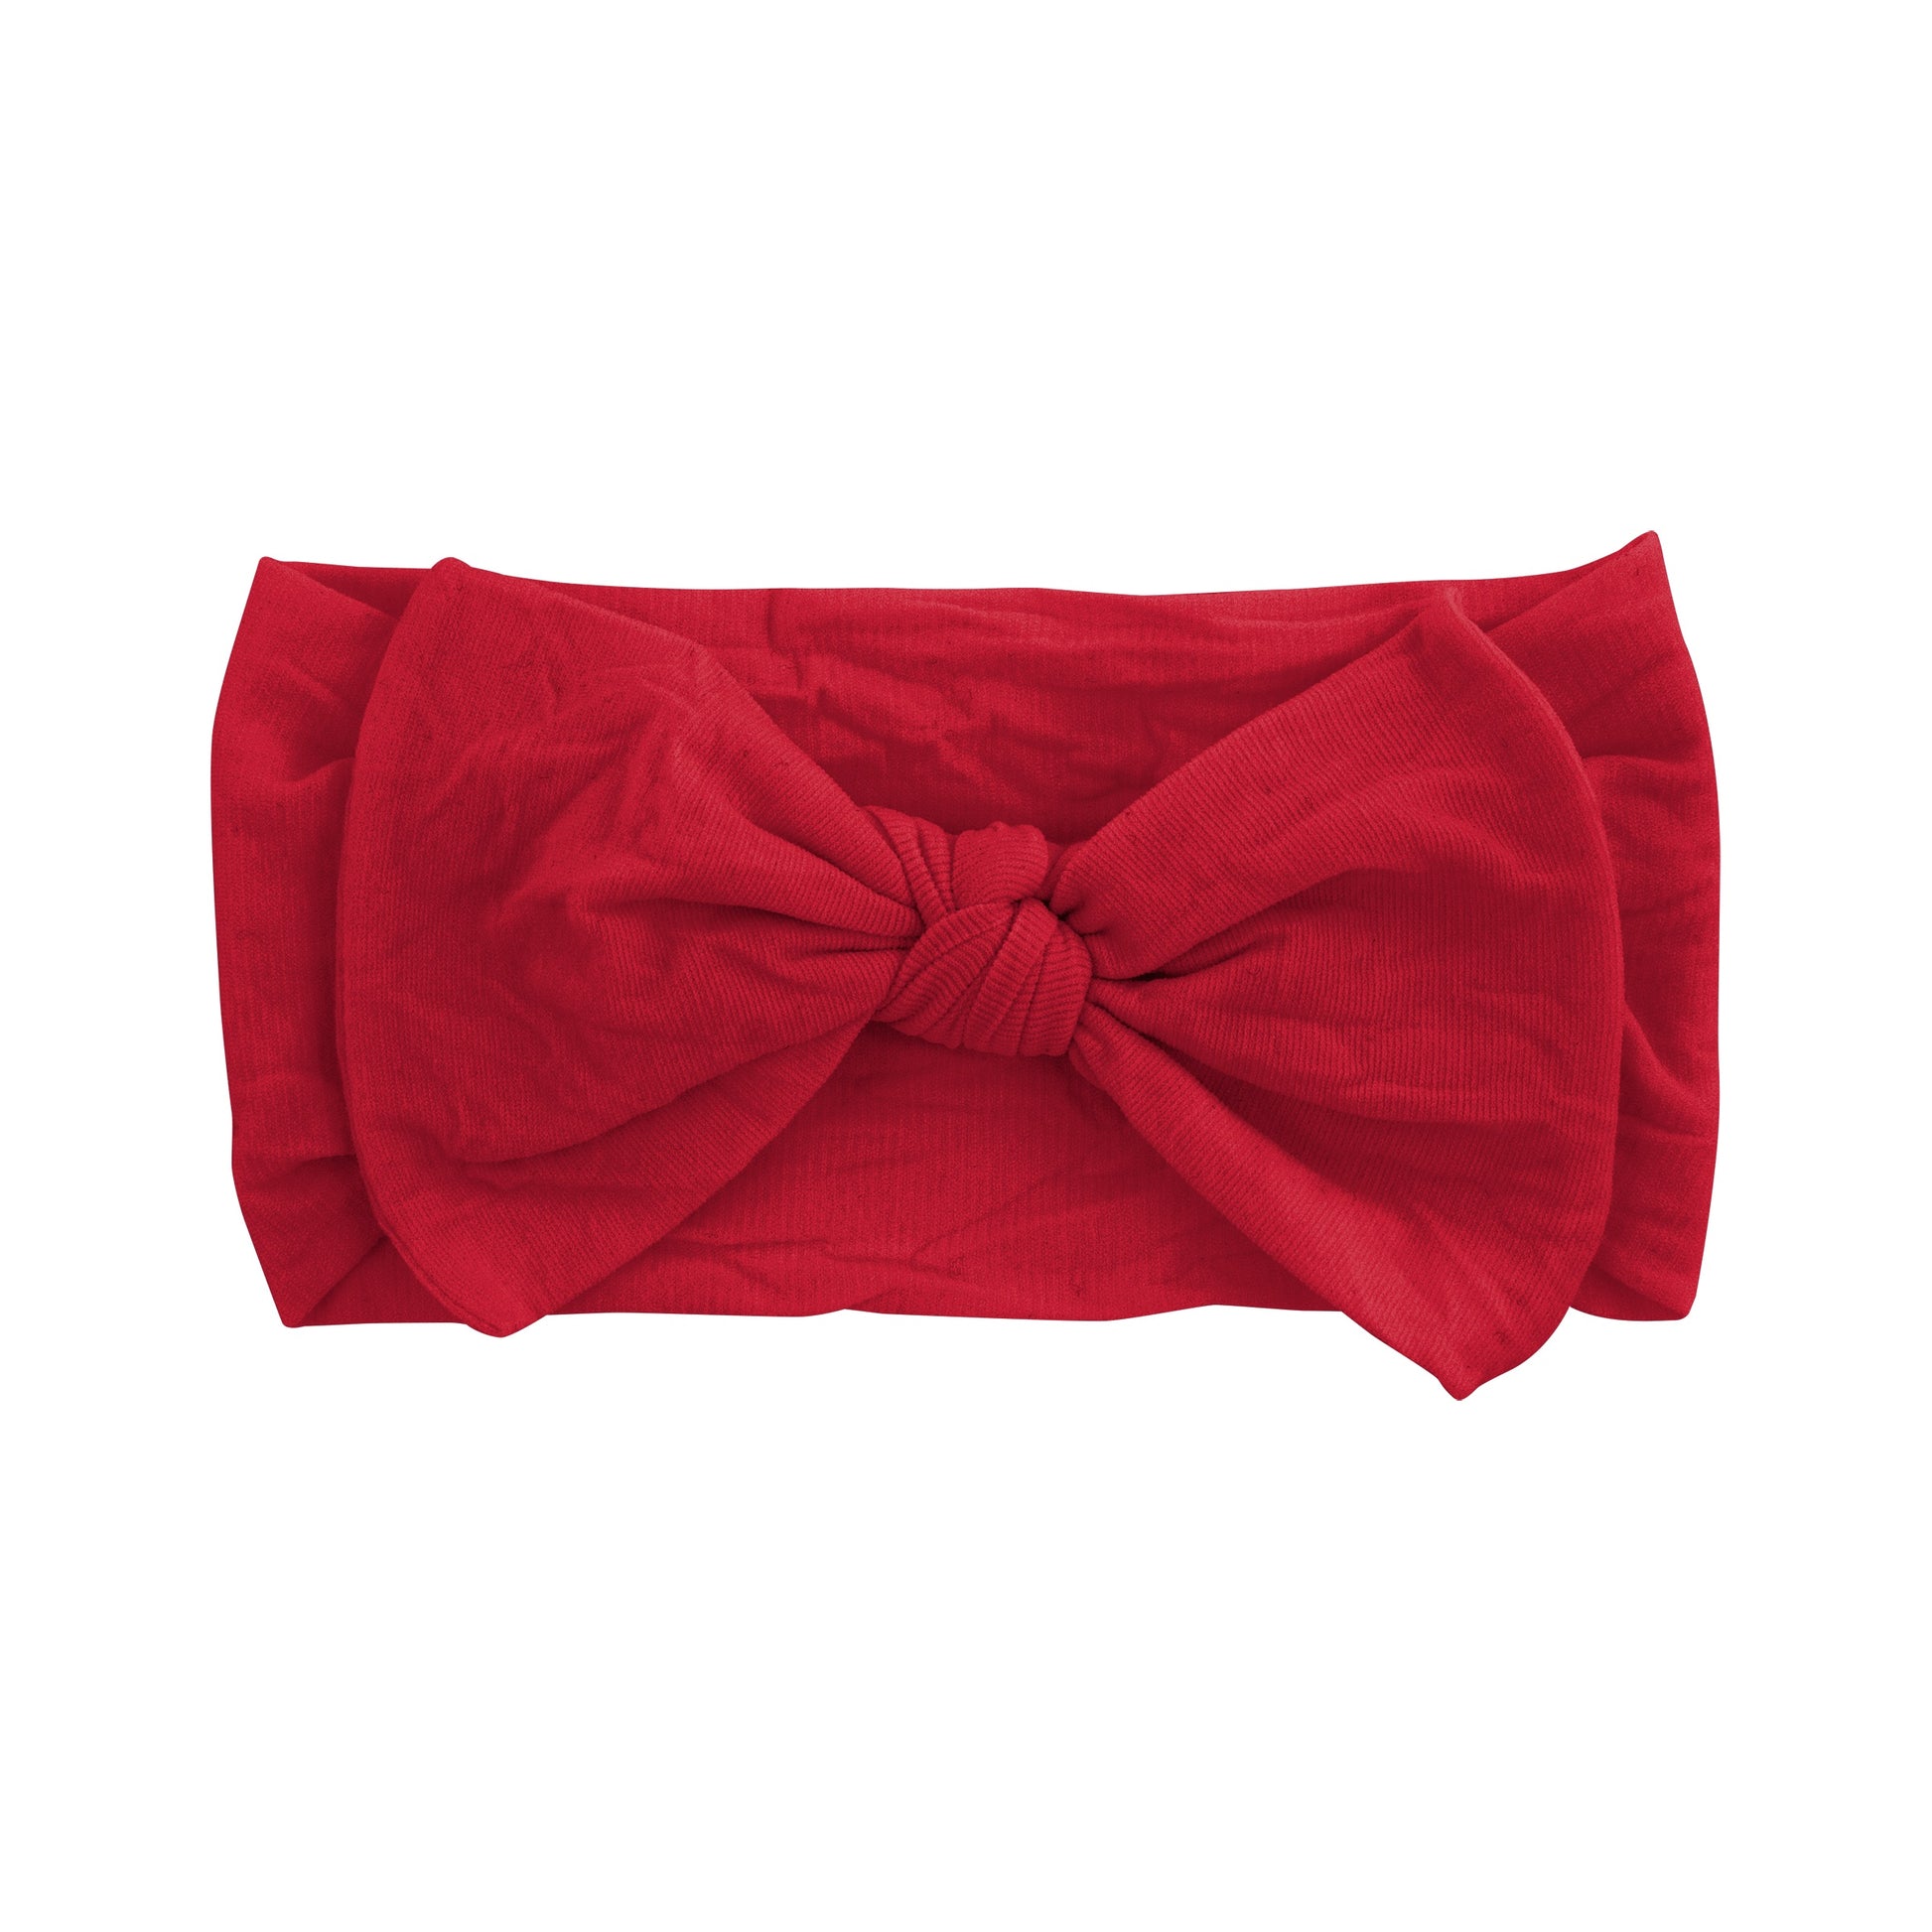 Red Nylon Bow Headband Red / 6-24 months - Doodlebug's Children's Boutique